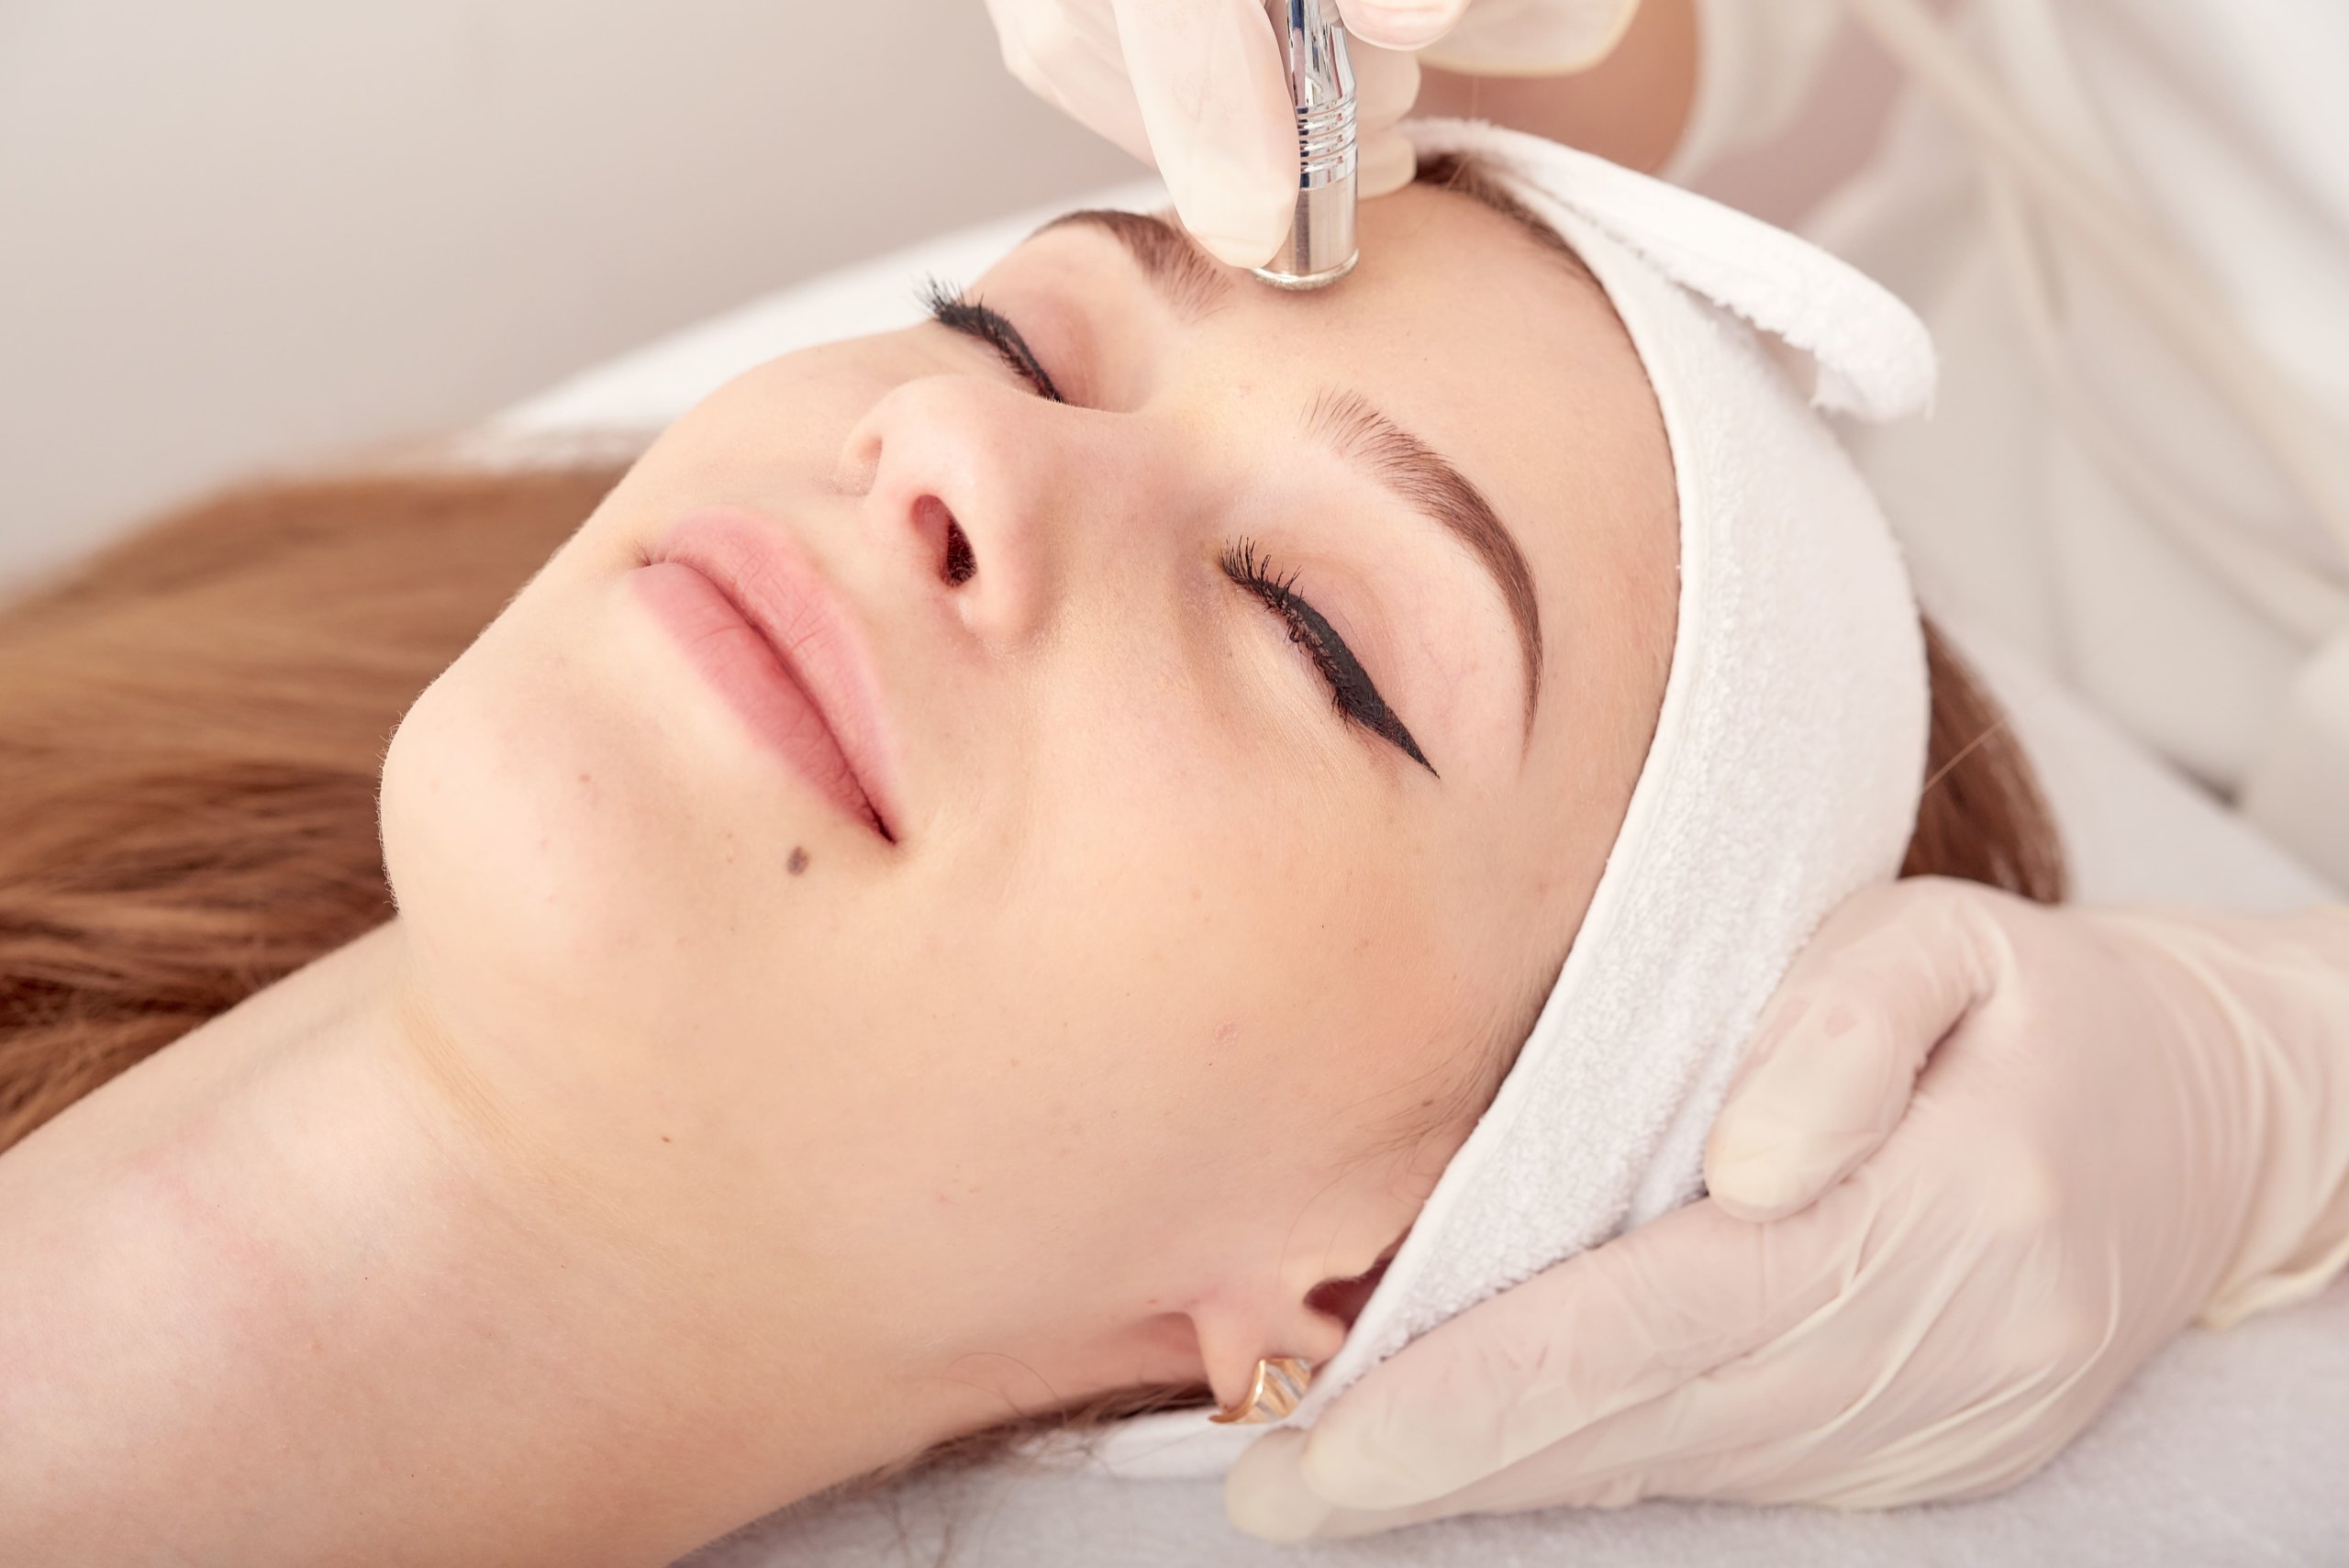 Which Diamond Facial Is Best For Glowing Skin